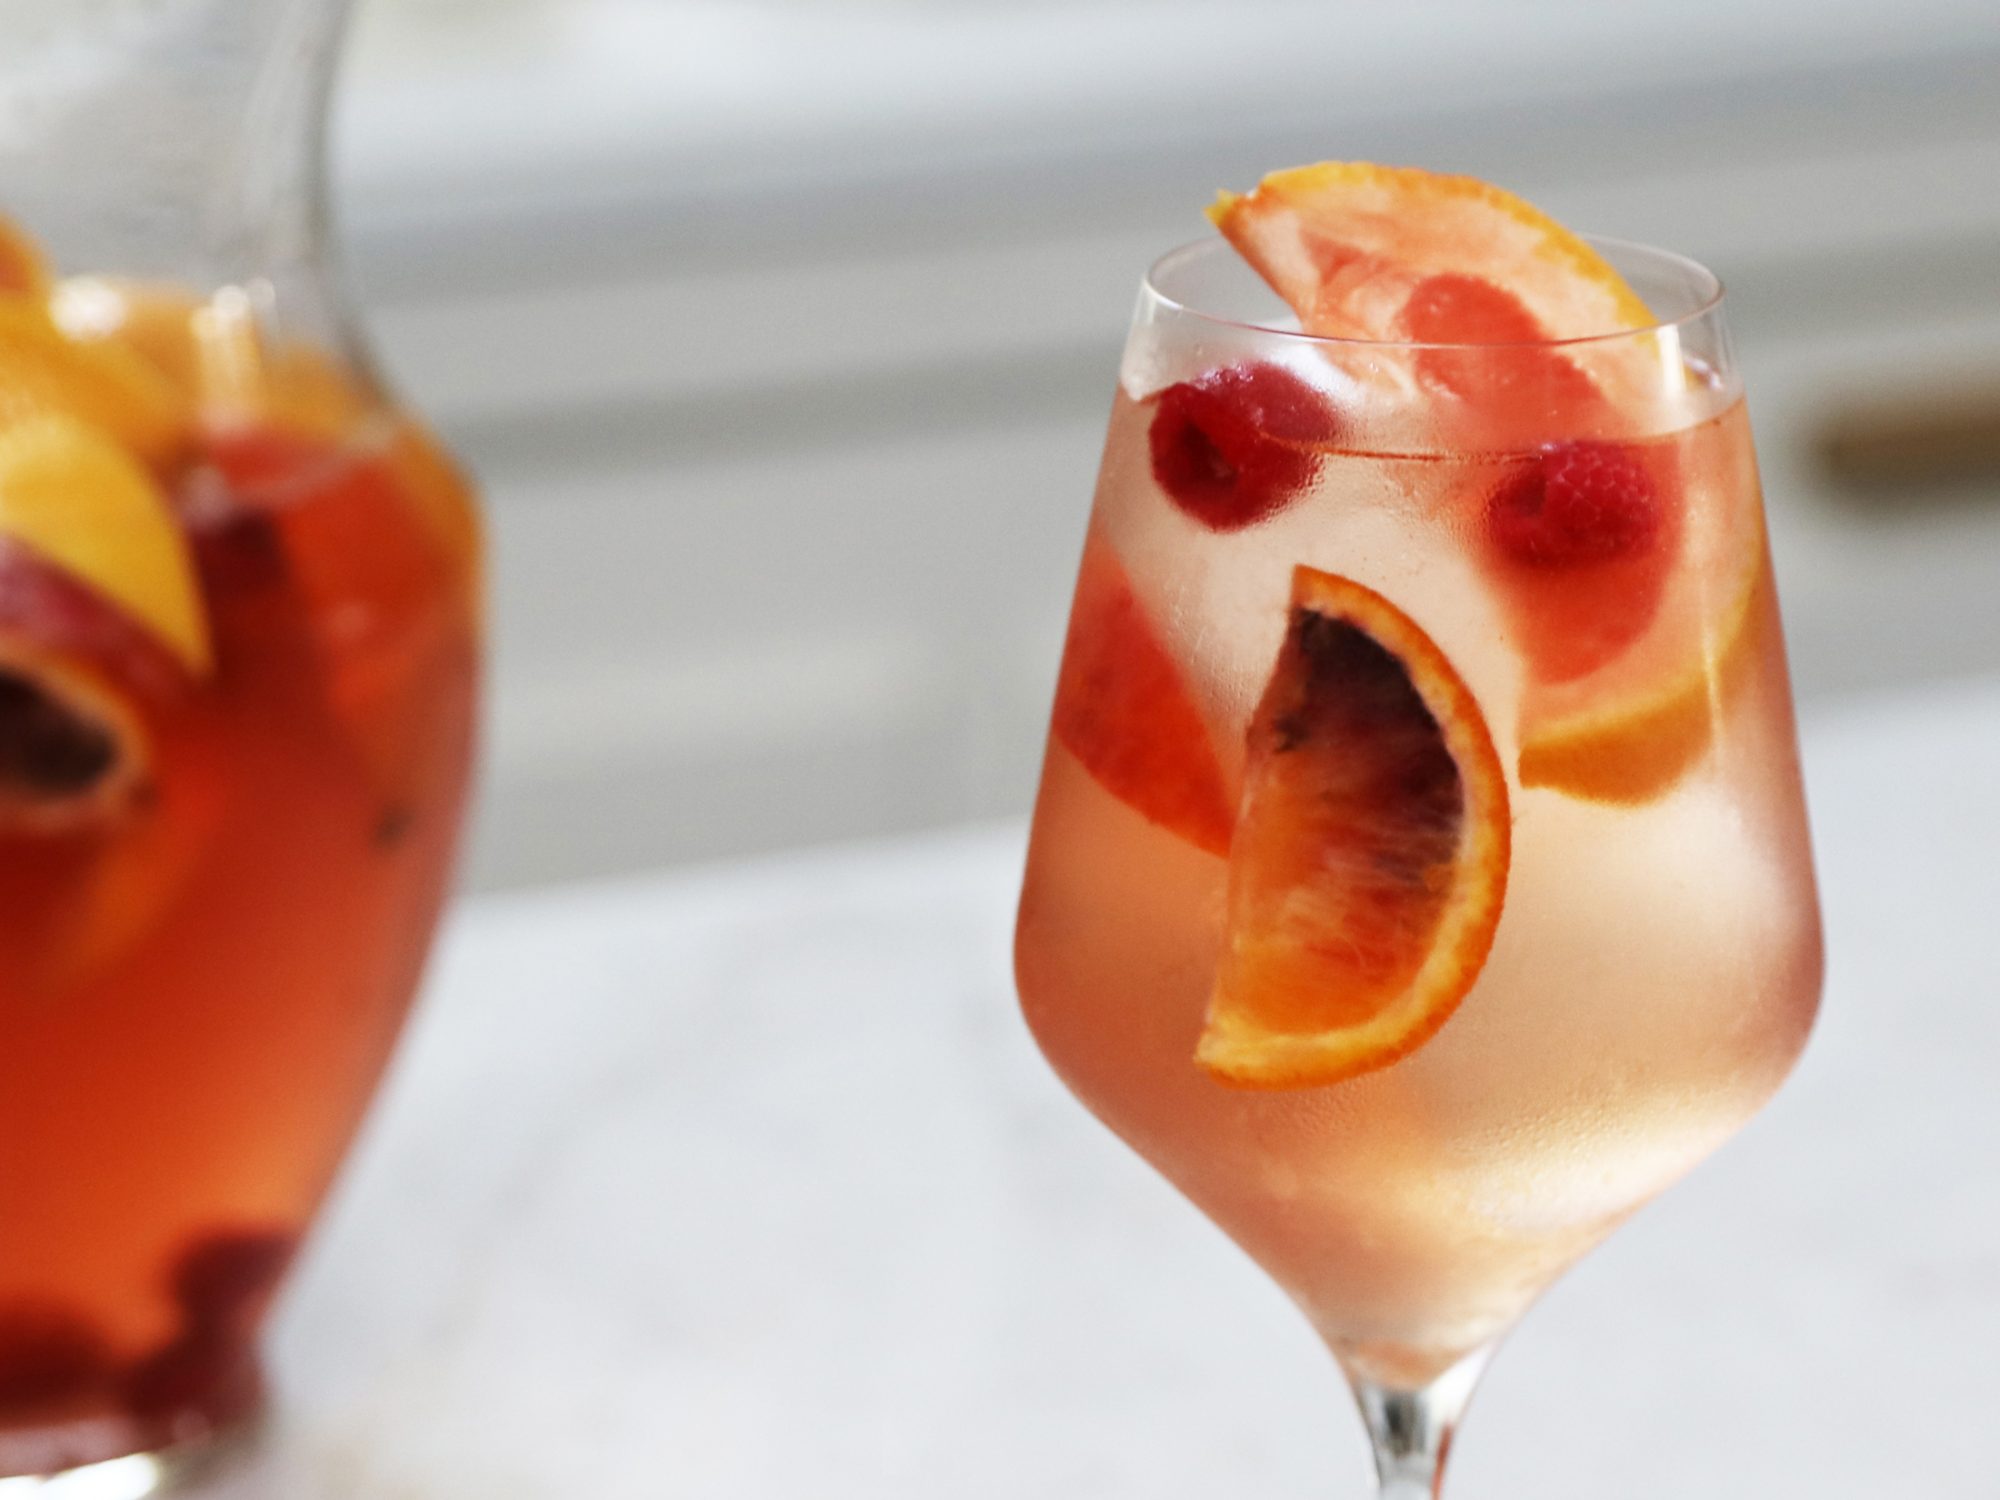 Will You Accept This Ros&eacute; Sangria image